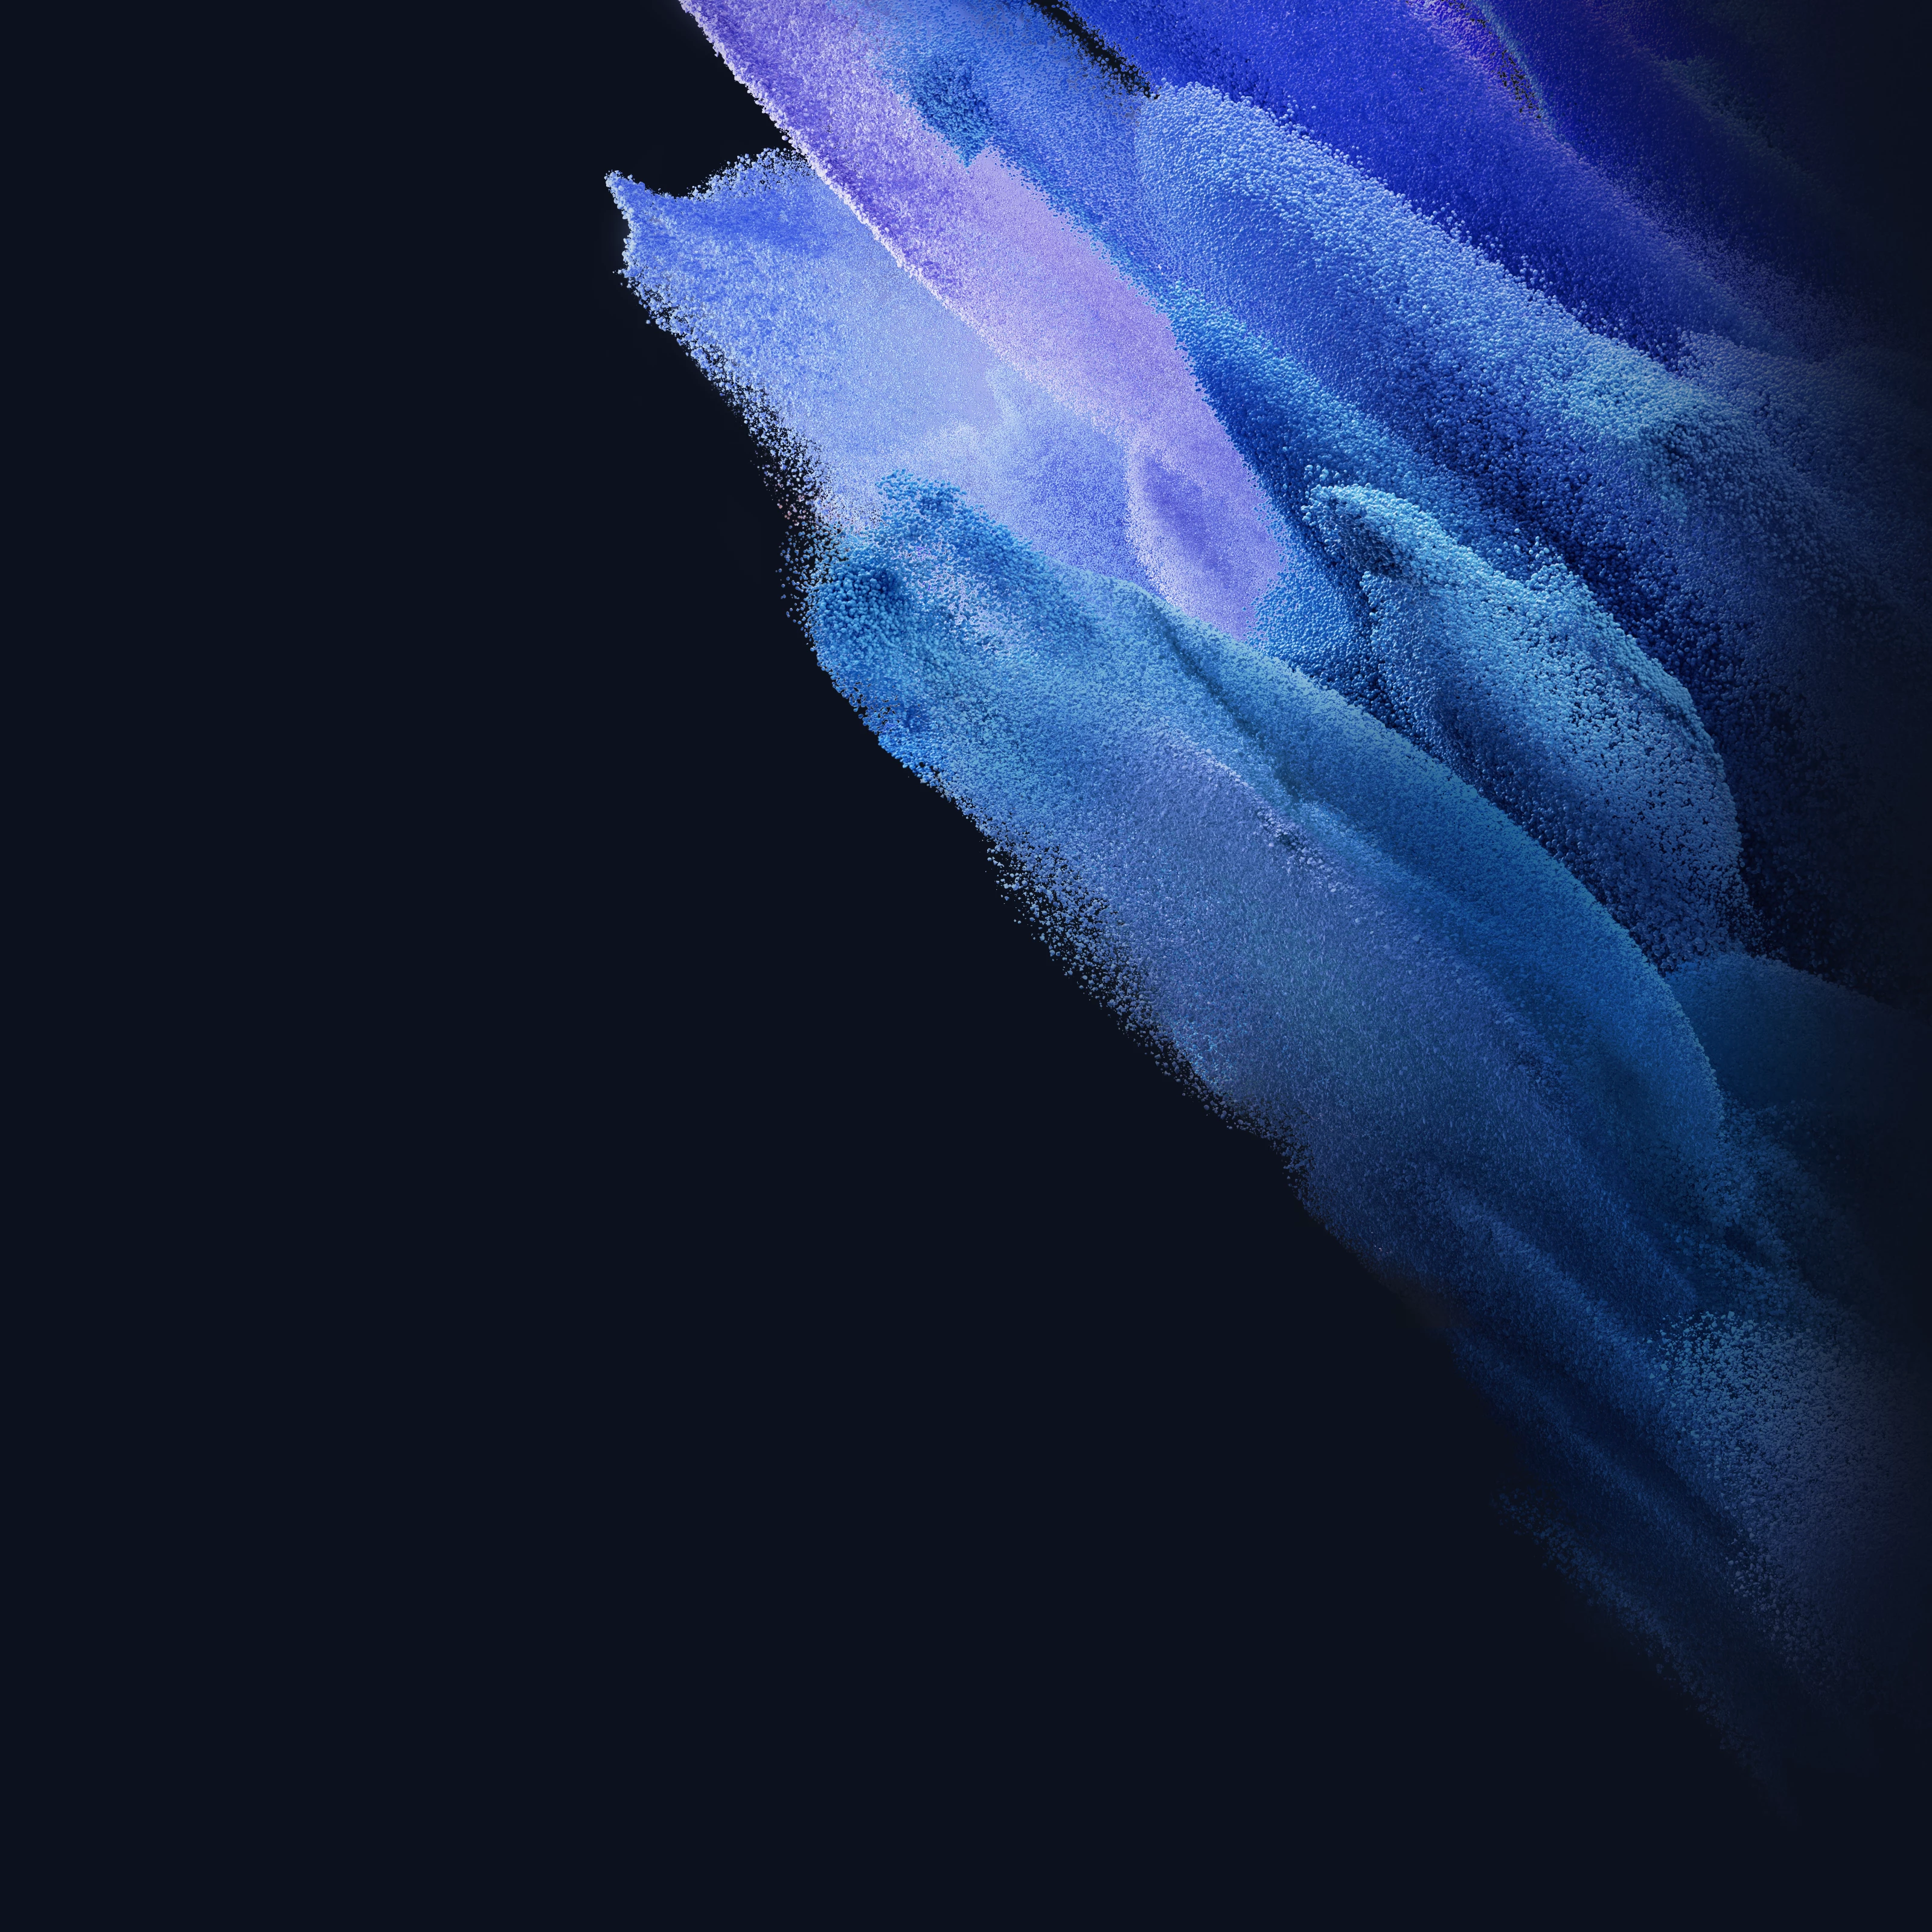 HD AMOLED wallpaper for your #Samsung #Galaxy with 1080×2280 px resolution.  Designed by very me. : r/MobileWallpaper